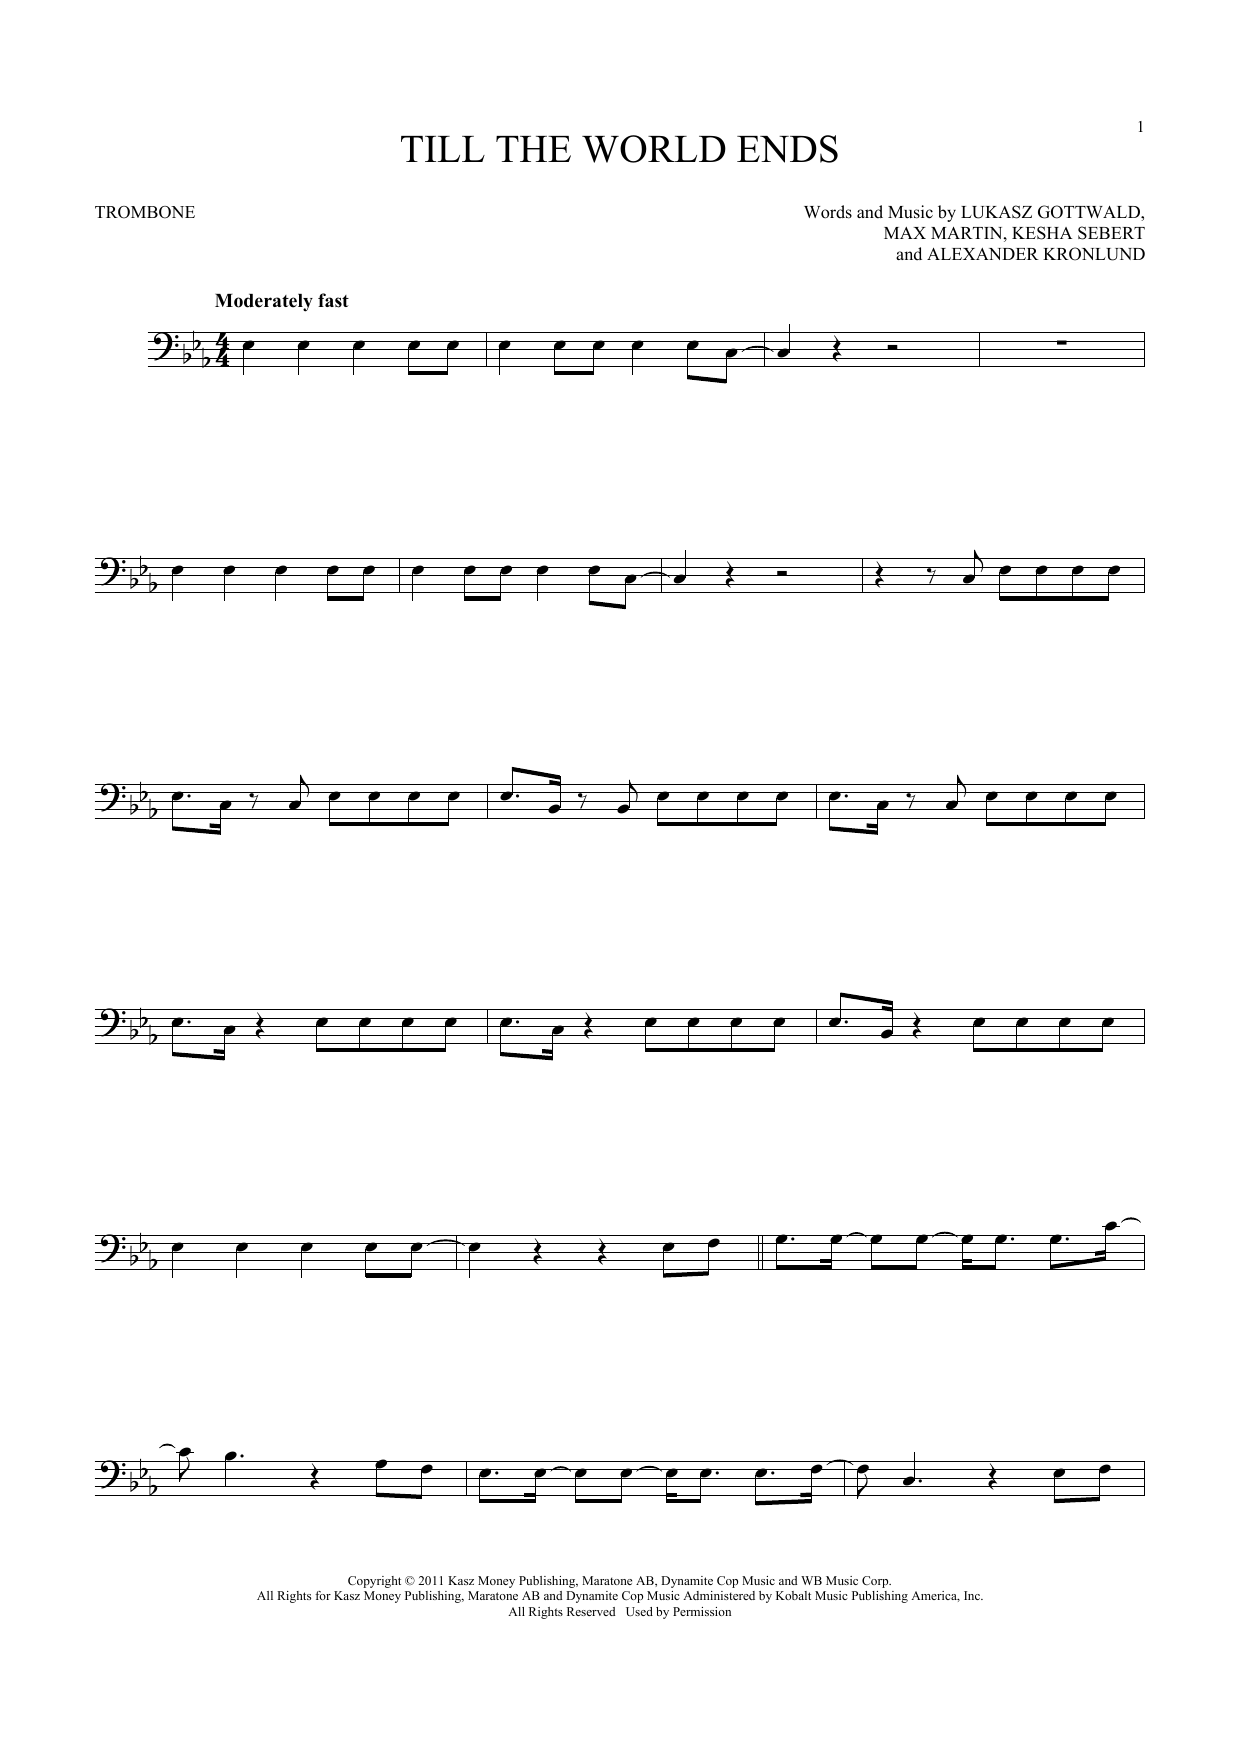 Download Britney Spears Till The World Ends Sheet Music